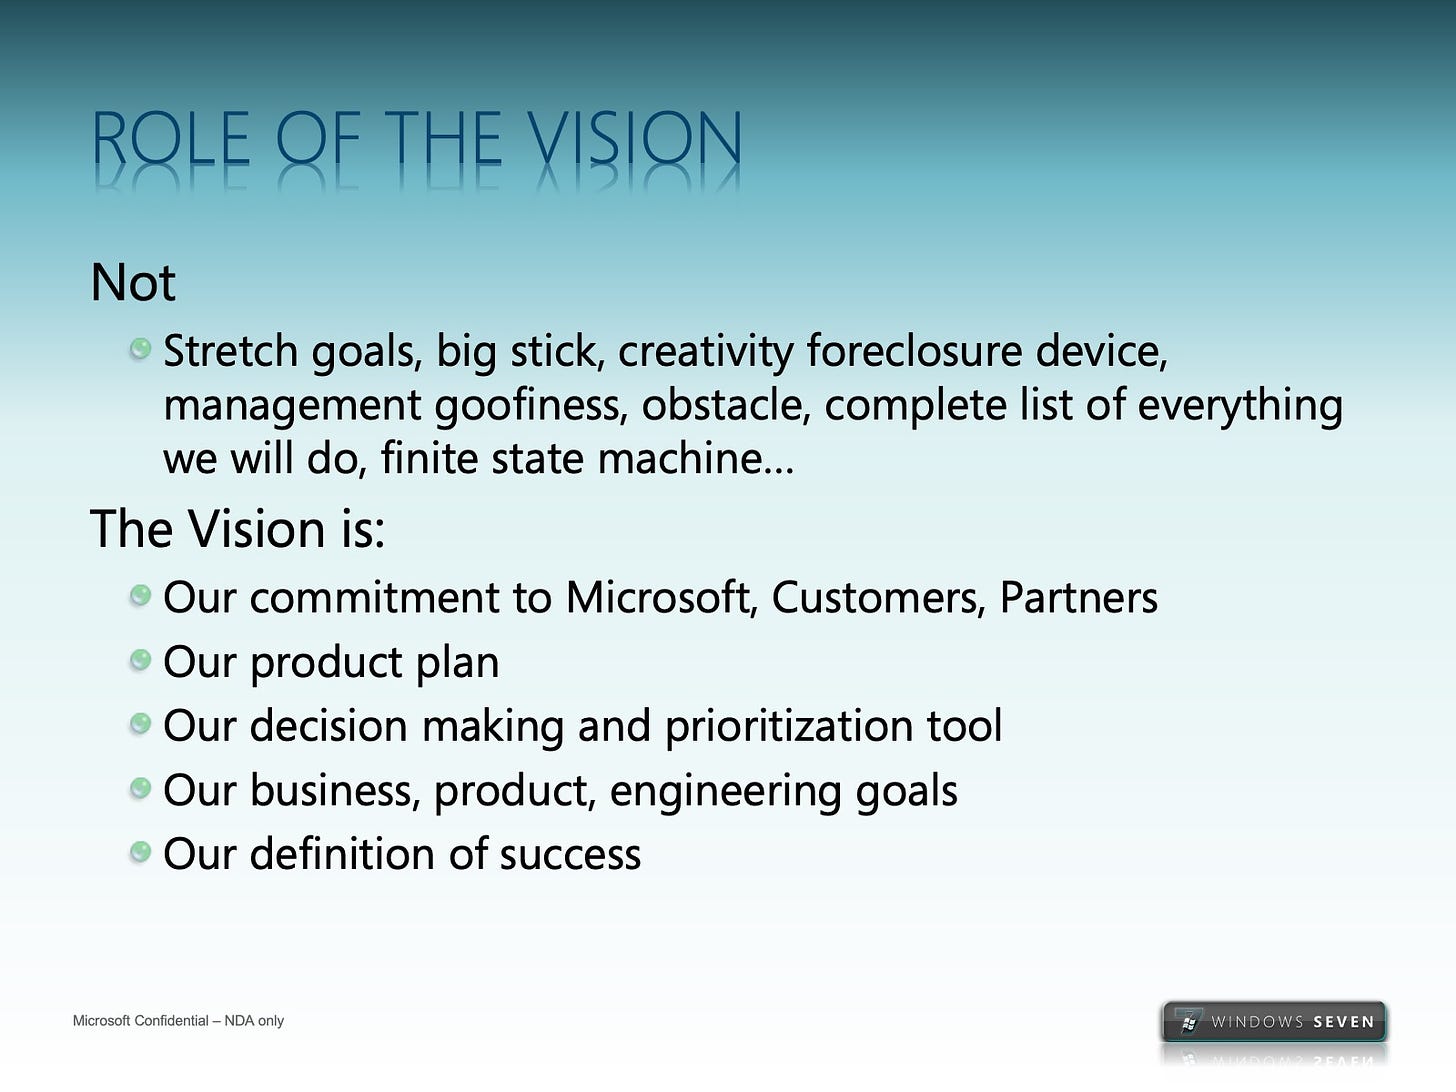 ROLE QF THE VISION Not • Stretch goals, big stick, creativity foreclosure device, management goofiness, obstacle, complete list of everything we will do, finite state machine.. The Vision is: • Our commitment to Microsoft, Customers, Partners • Our product plan • Our decision making and prioritization tool • Our business, product, engineering goals • Our definition of success